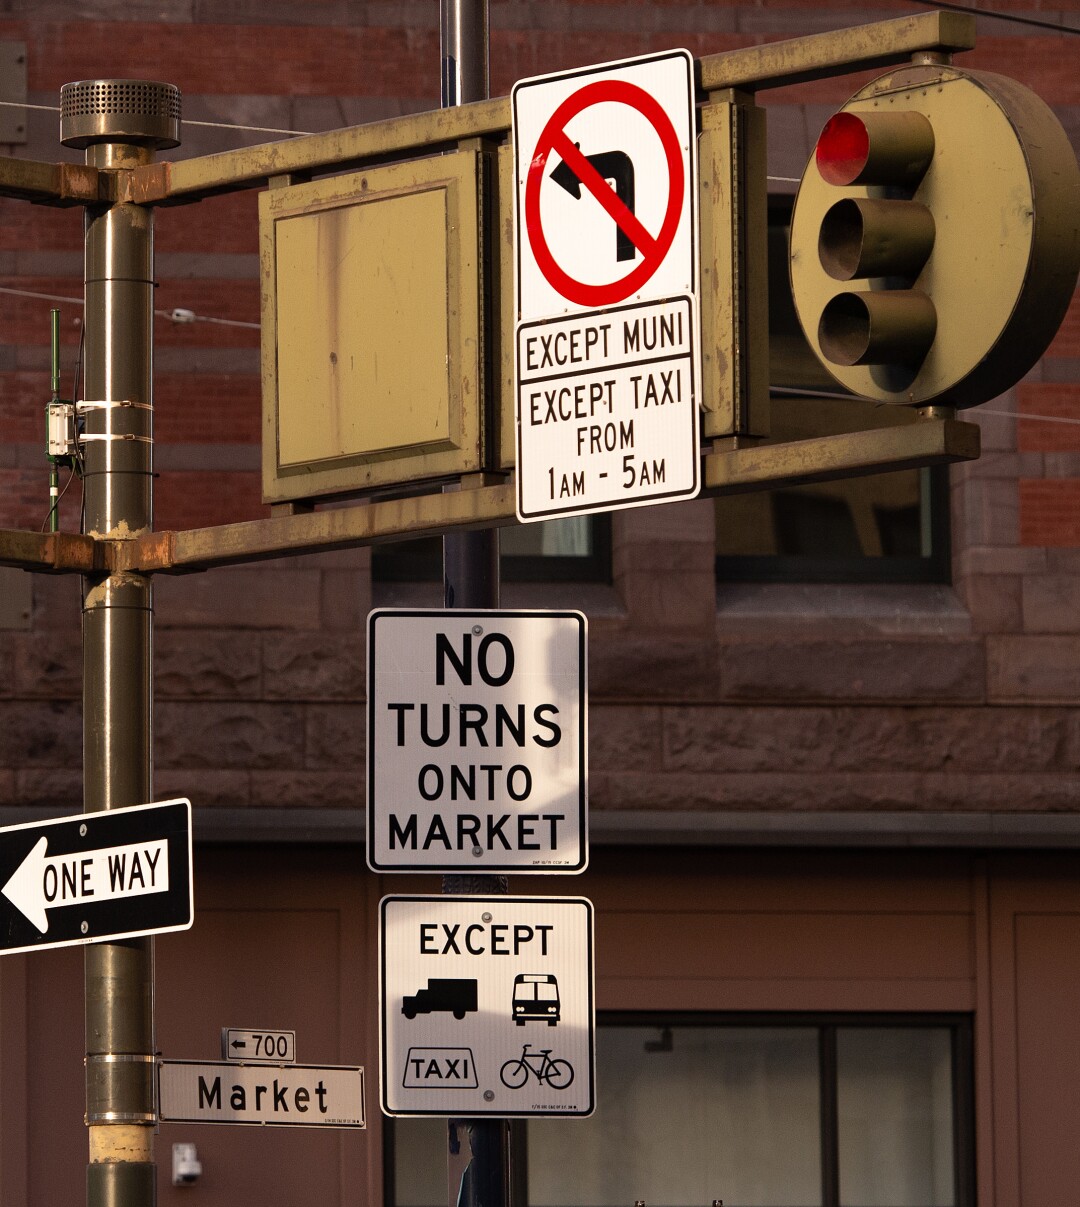 Posted signs warn of new traffic laws on a section of Market Street in San Francisco